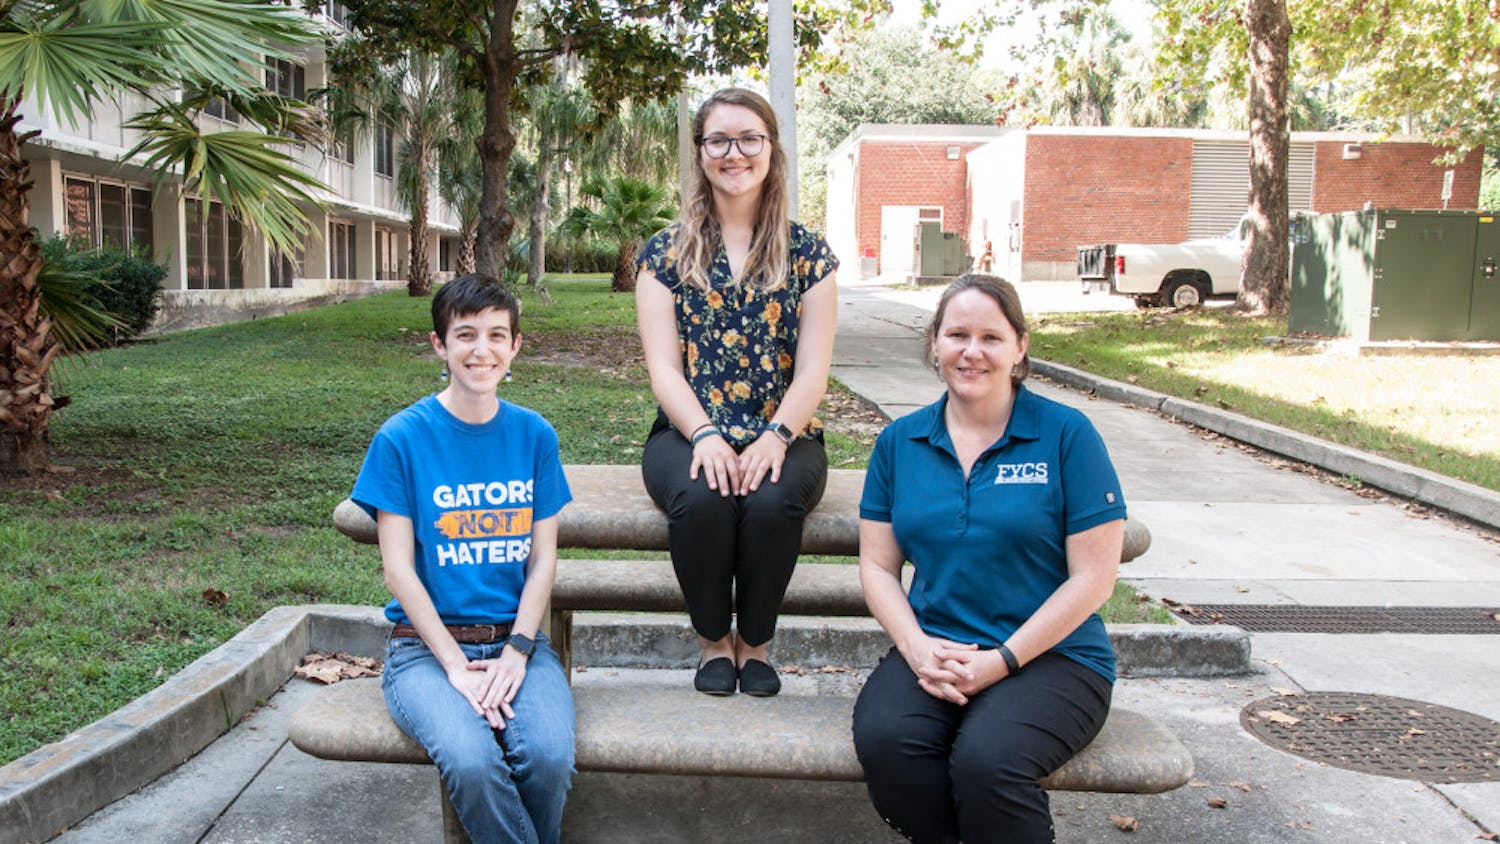 Elaine Giles (left), assistant director for UF's Brown Center for Leadership and Service, Emily Carroll (middle), former UF student, and Jennifer Jones (right), UF assistant professor, made up the volunteering research team.